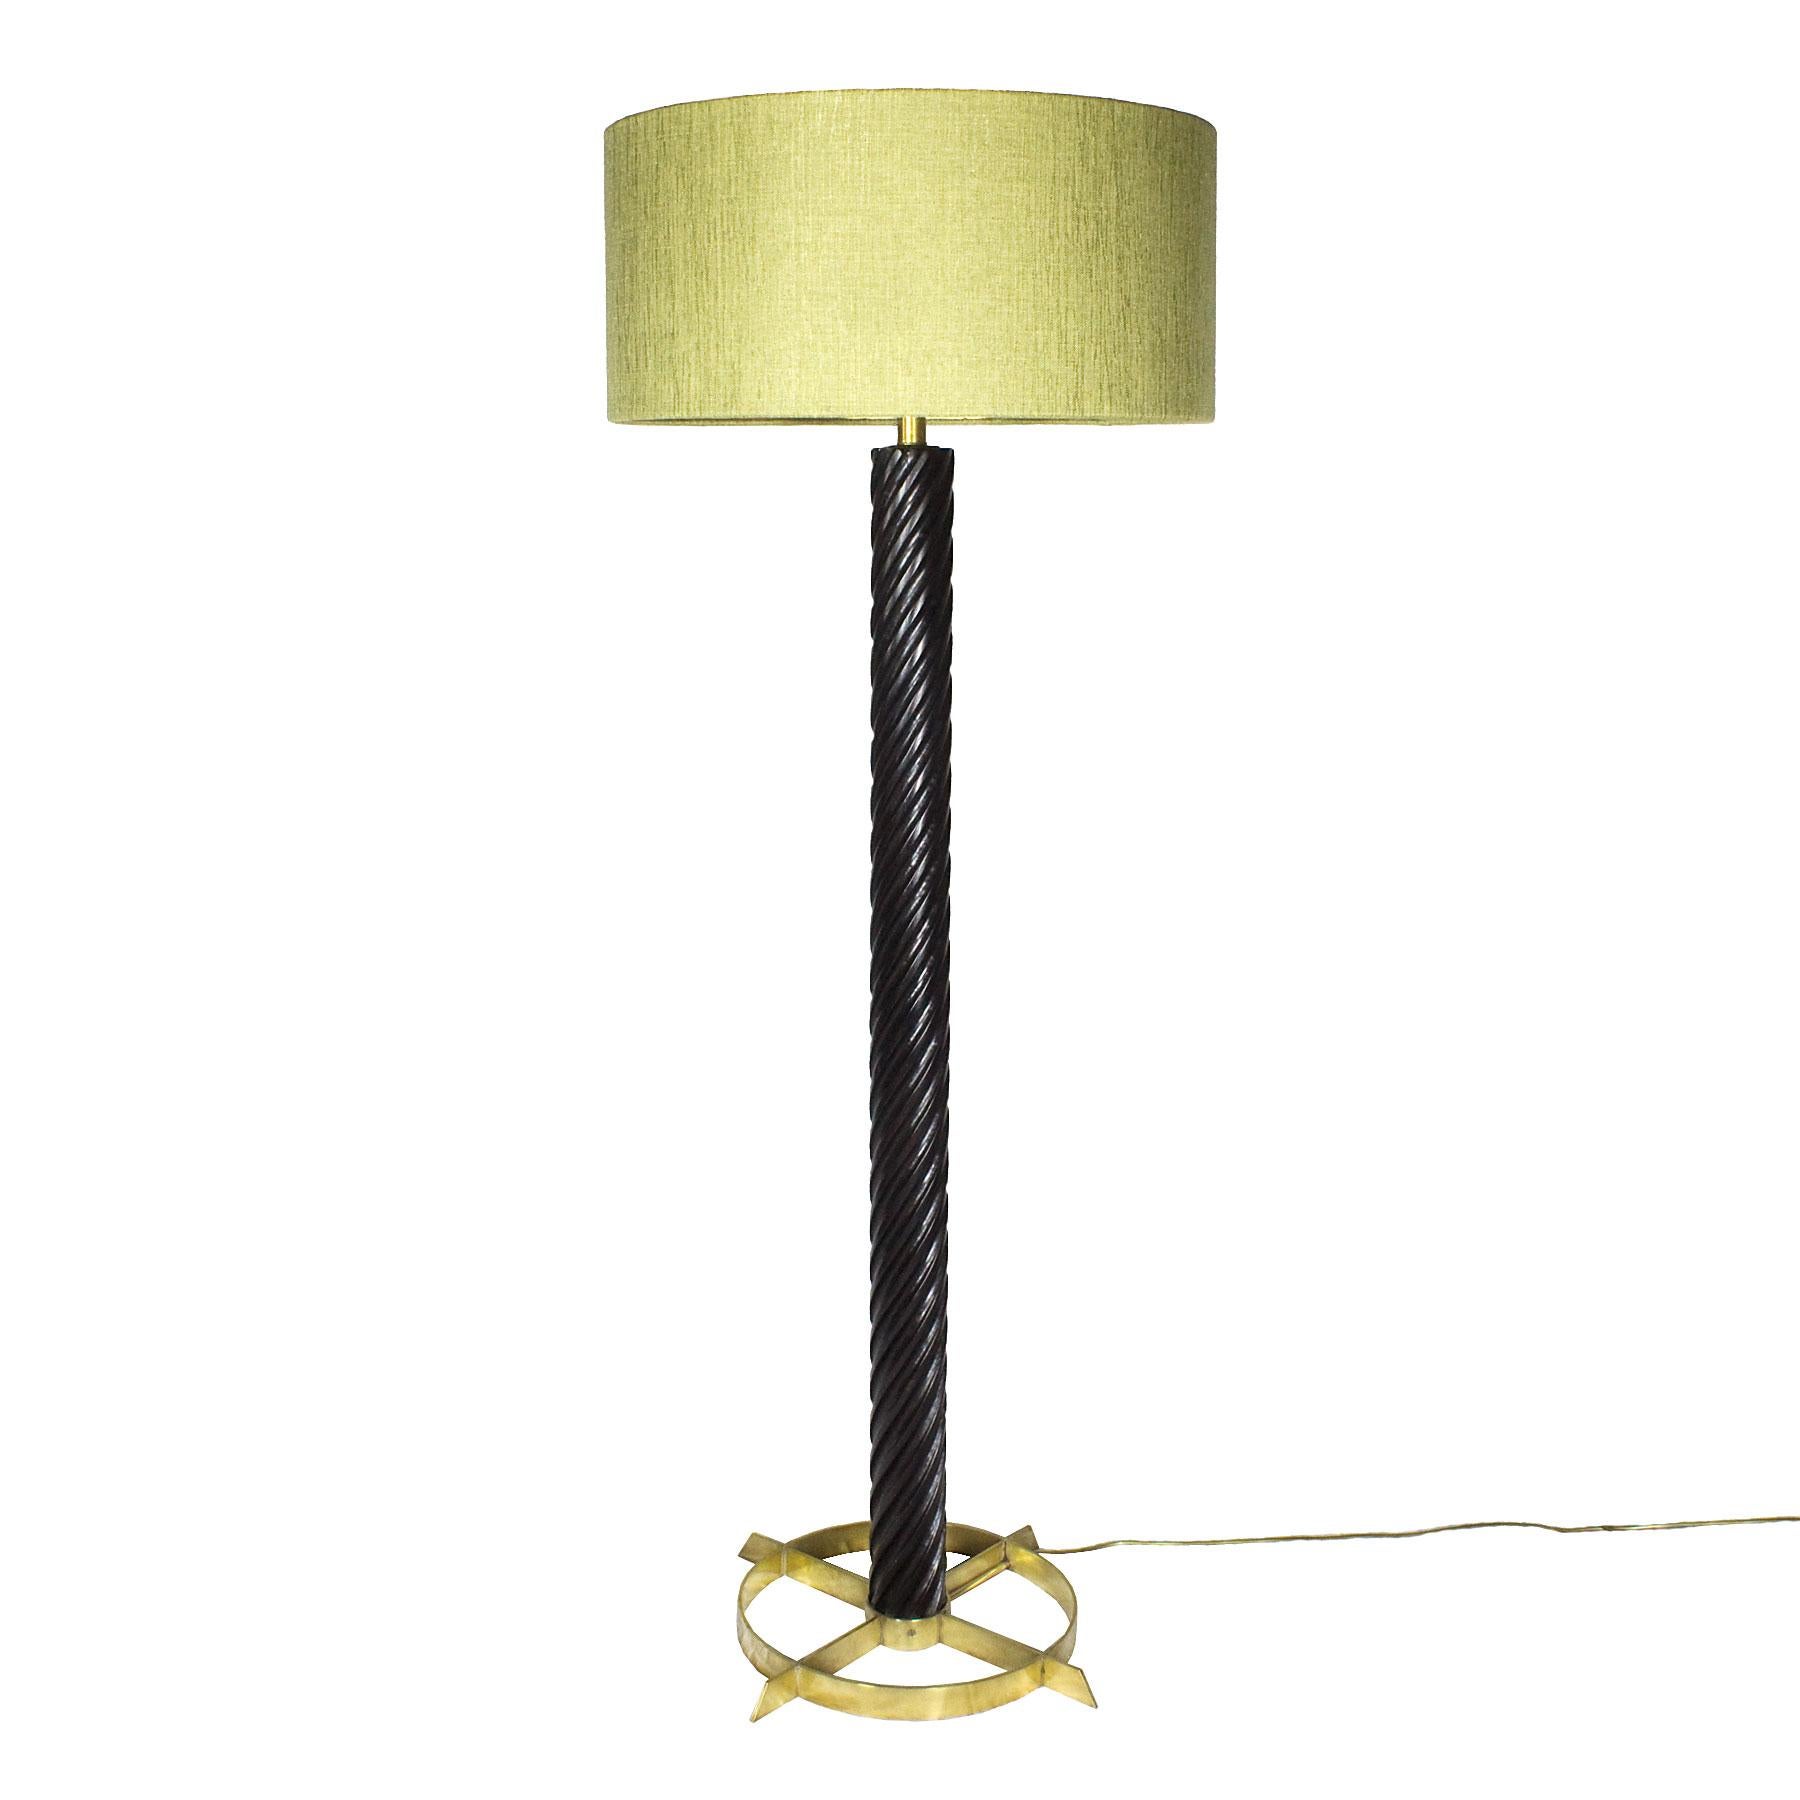 Standing lamp with stained and waxed twisted walnut stand and solid brass base. Redone double lightning system. Light green fabric lampshade.

Design: Jordi Vilanova 

Spain, Barcelona circa 1960.